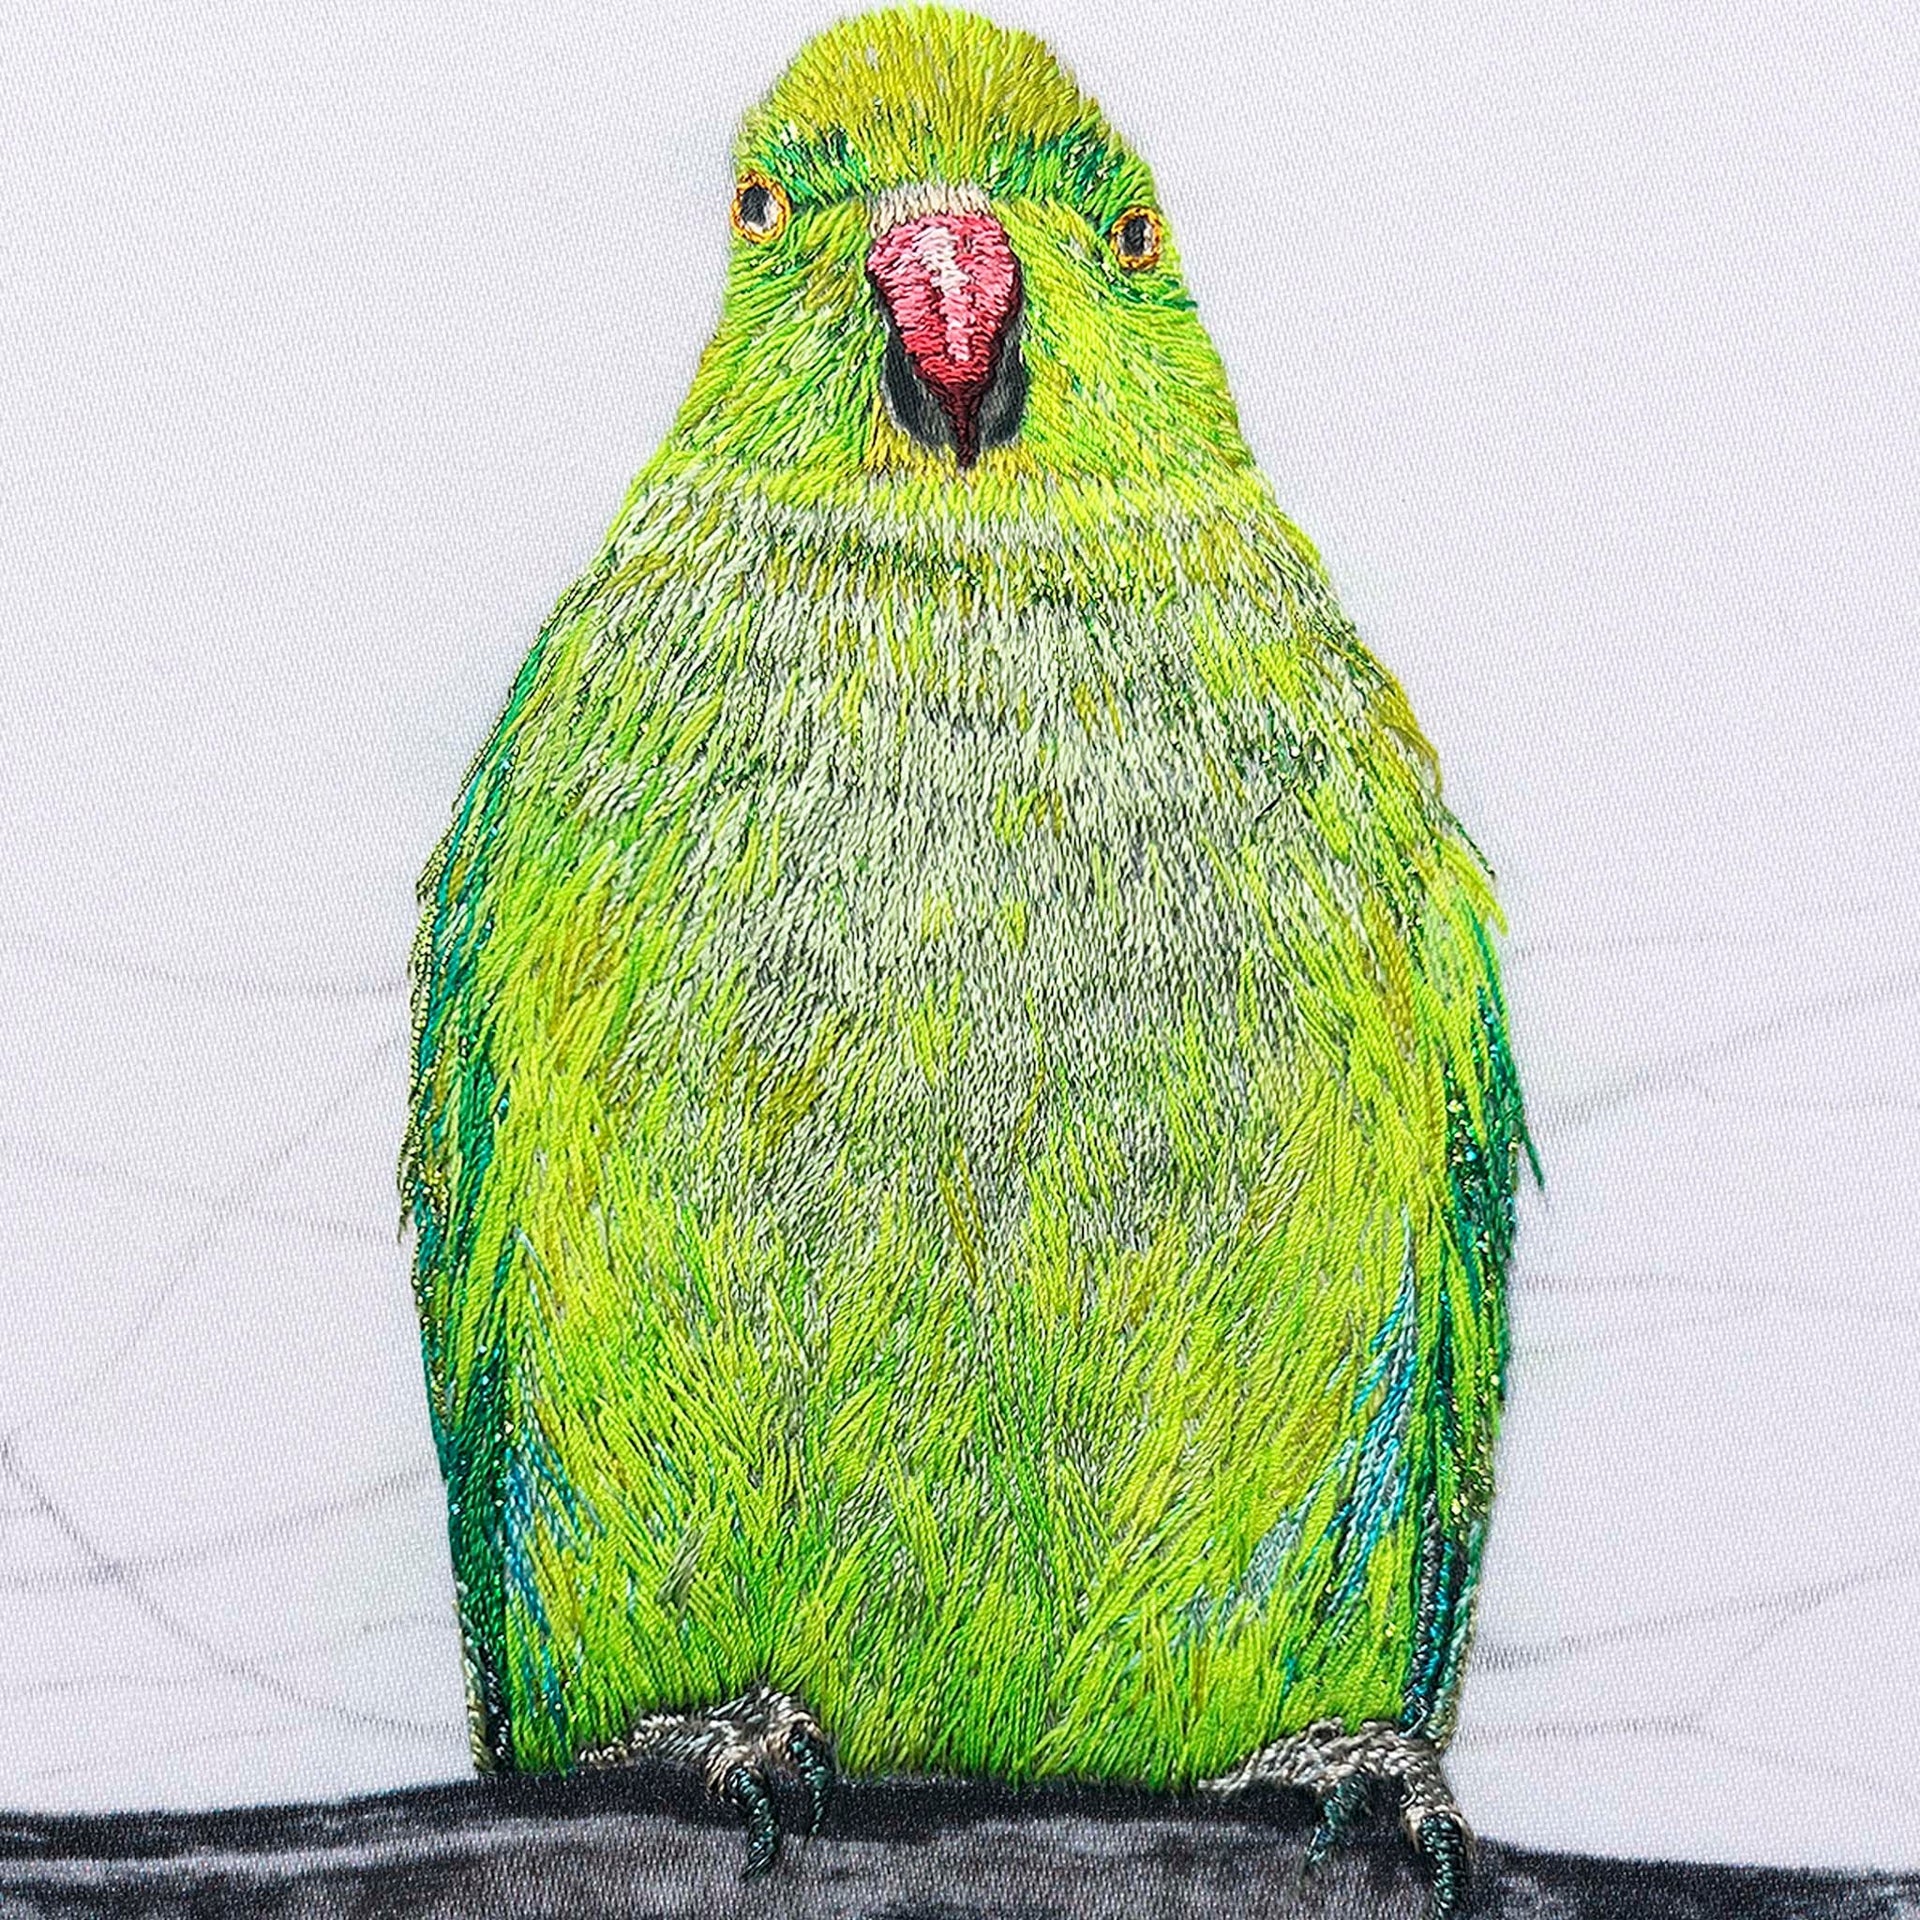 Pencil drawn and hand embroidered Parakeet artwork close up